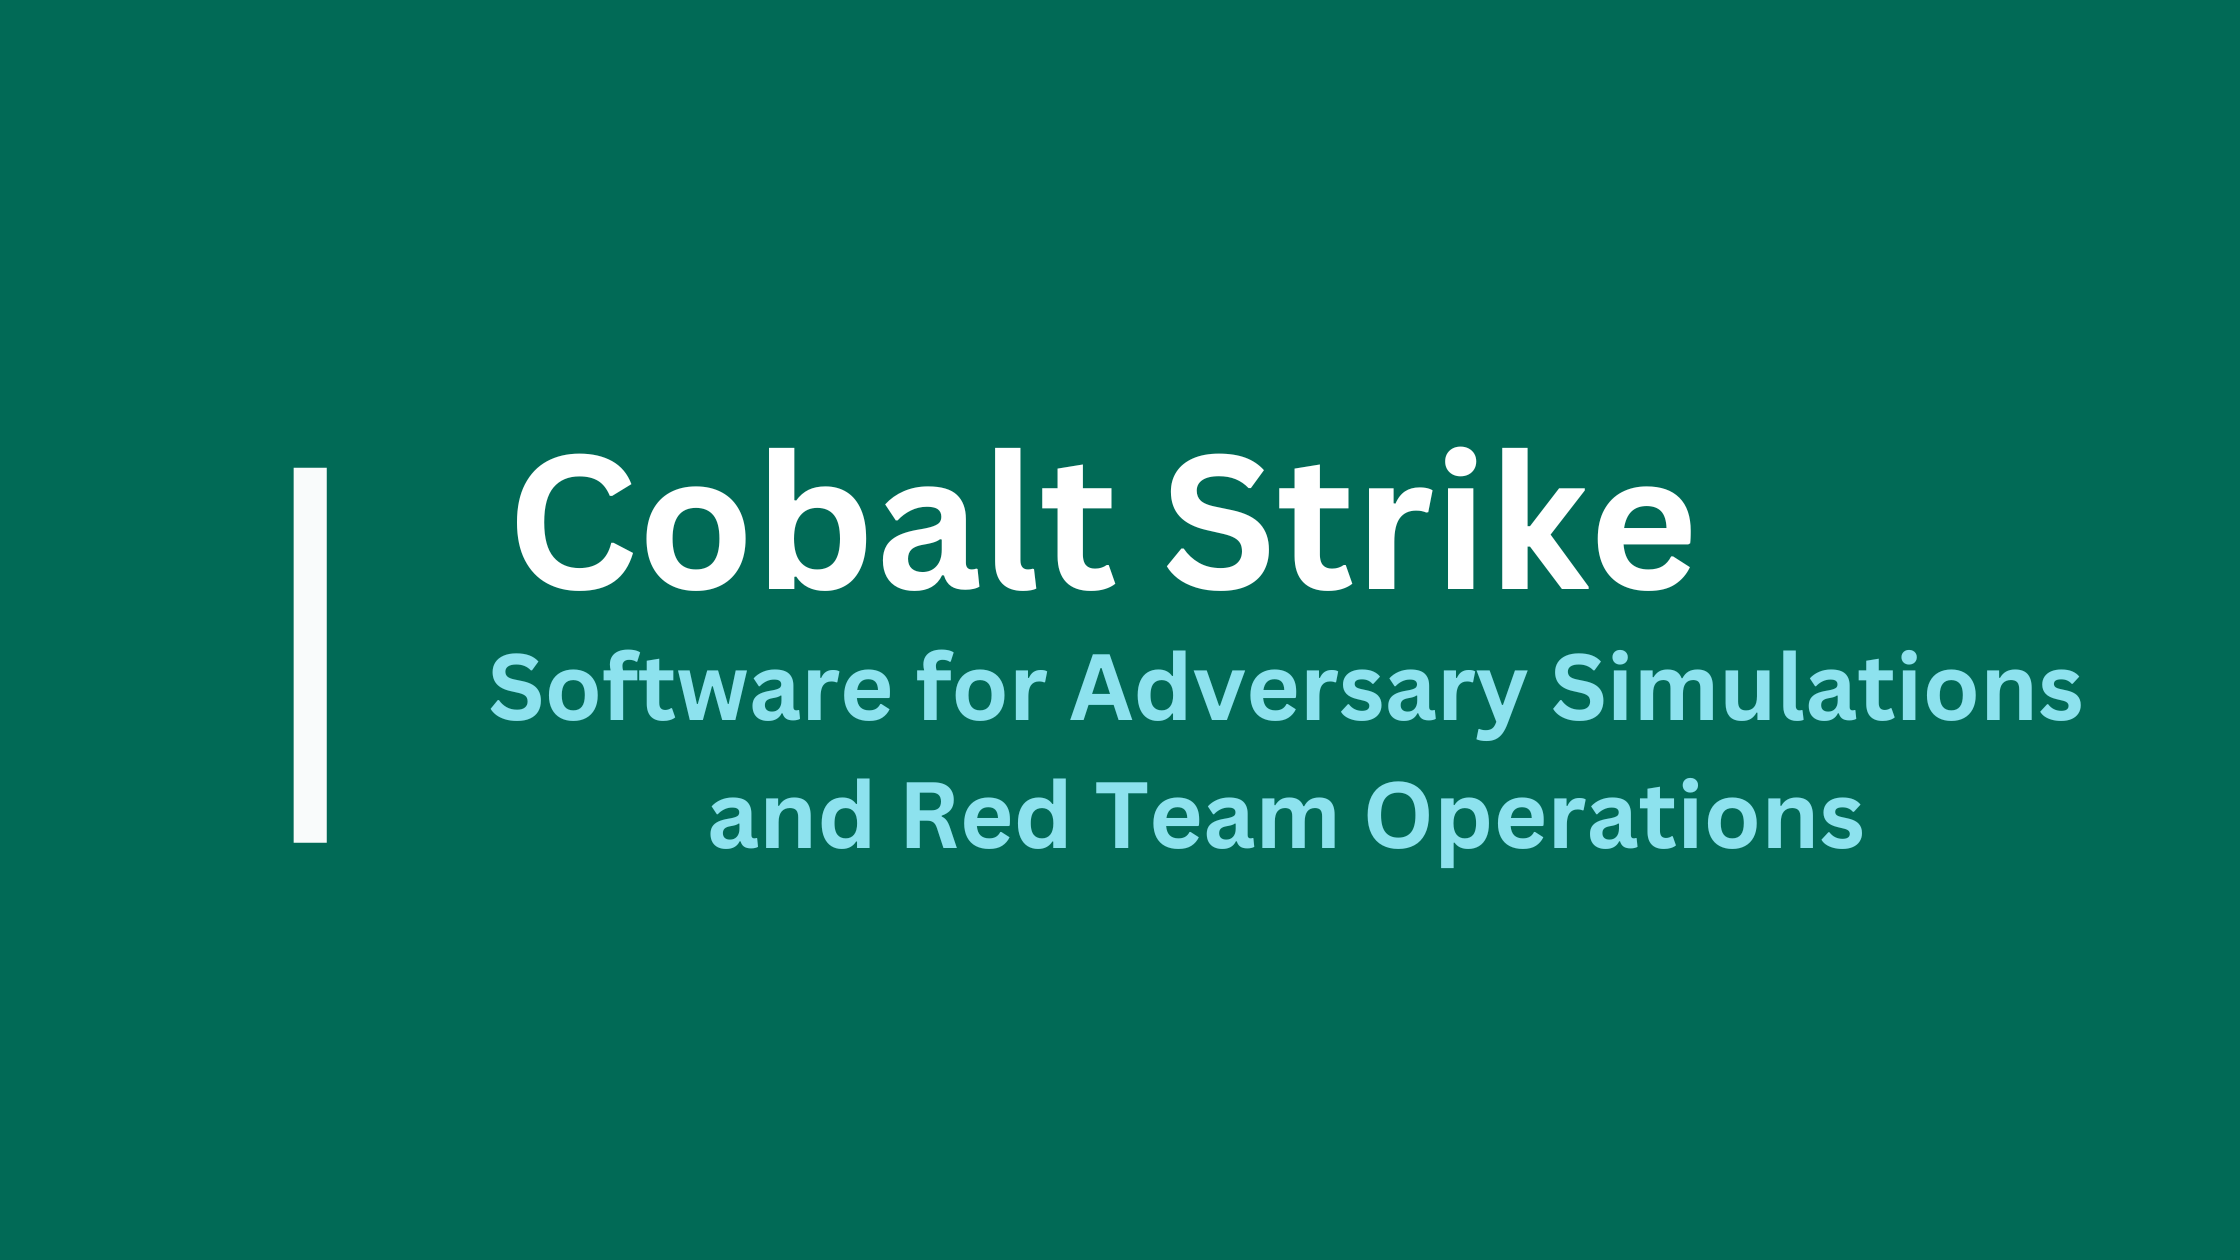 Logo of Cobalt Strike, which is cybersecurity software designed for adversary simulation and red team operations, set against a dark green background.